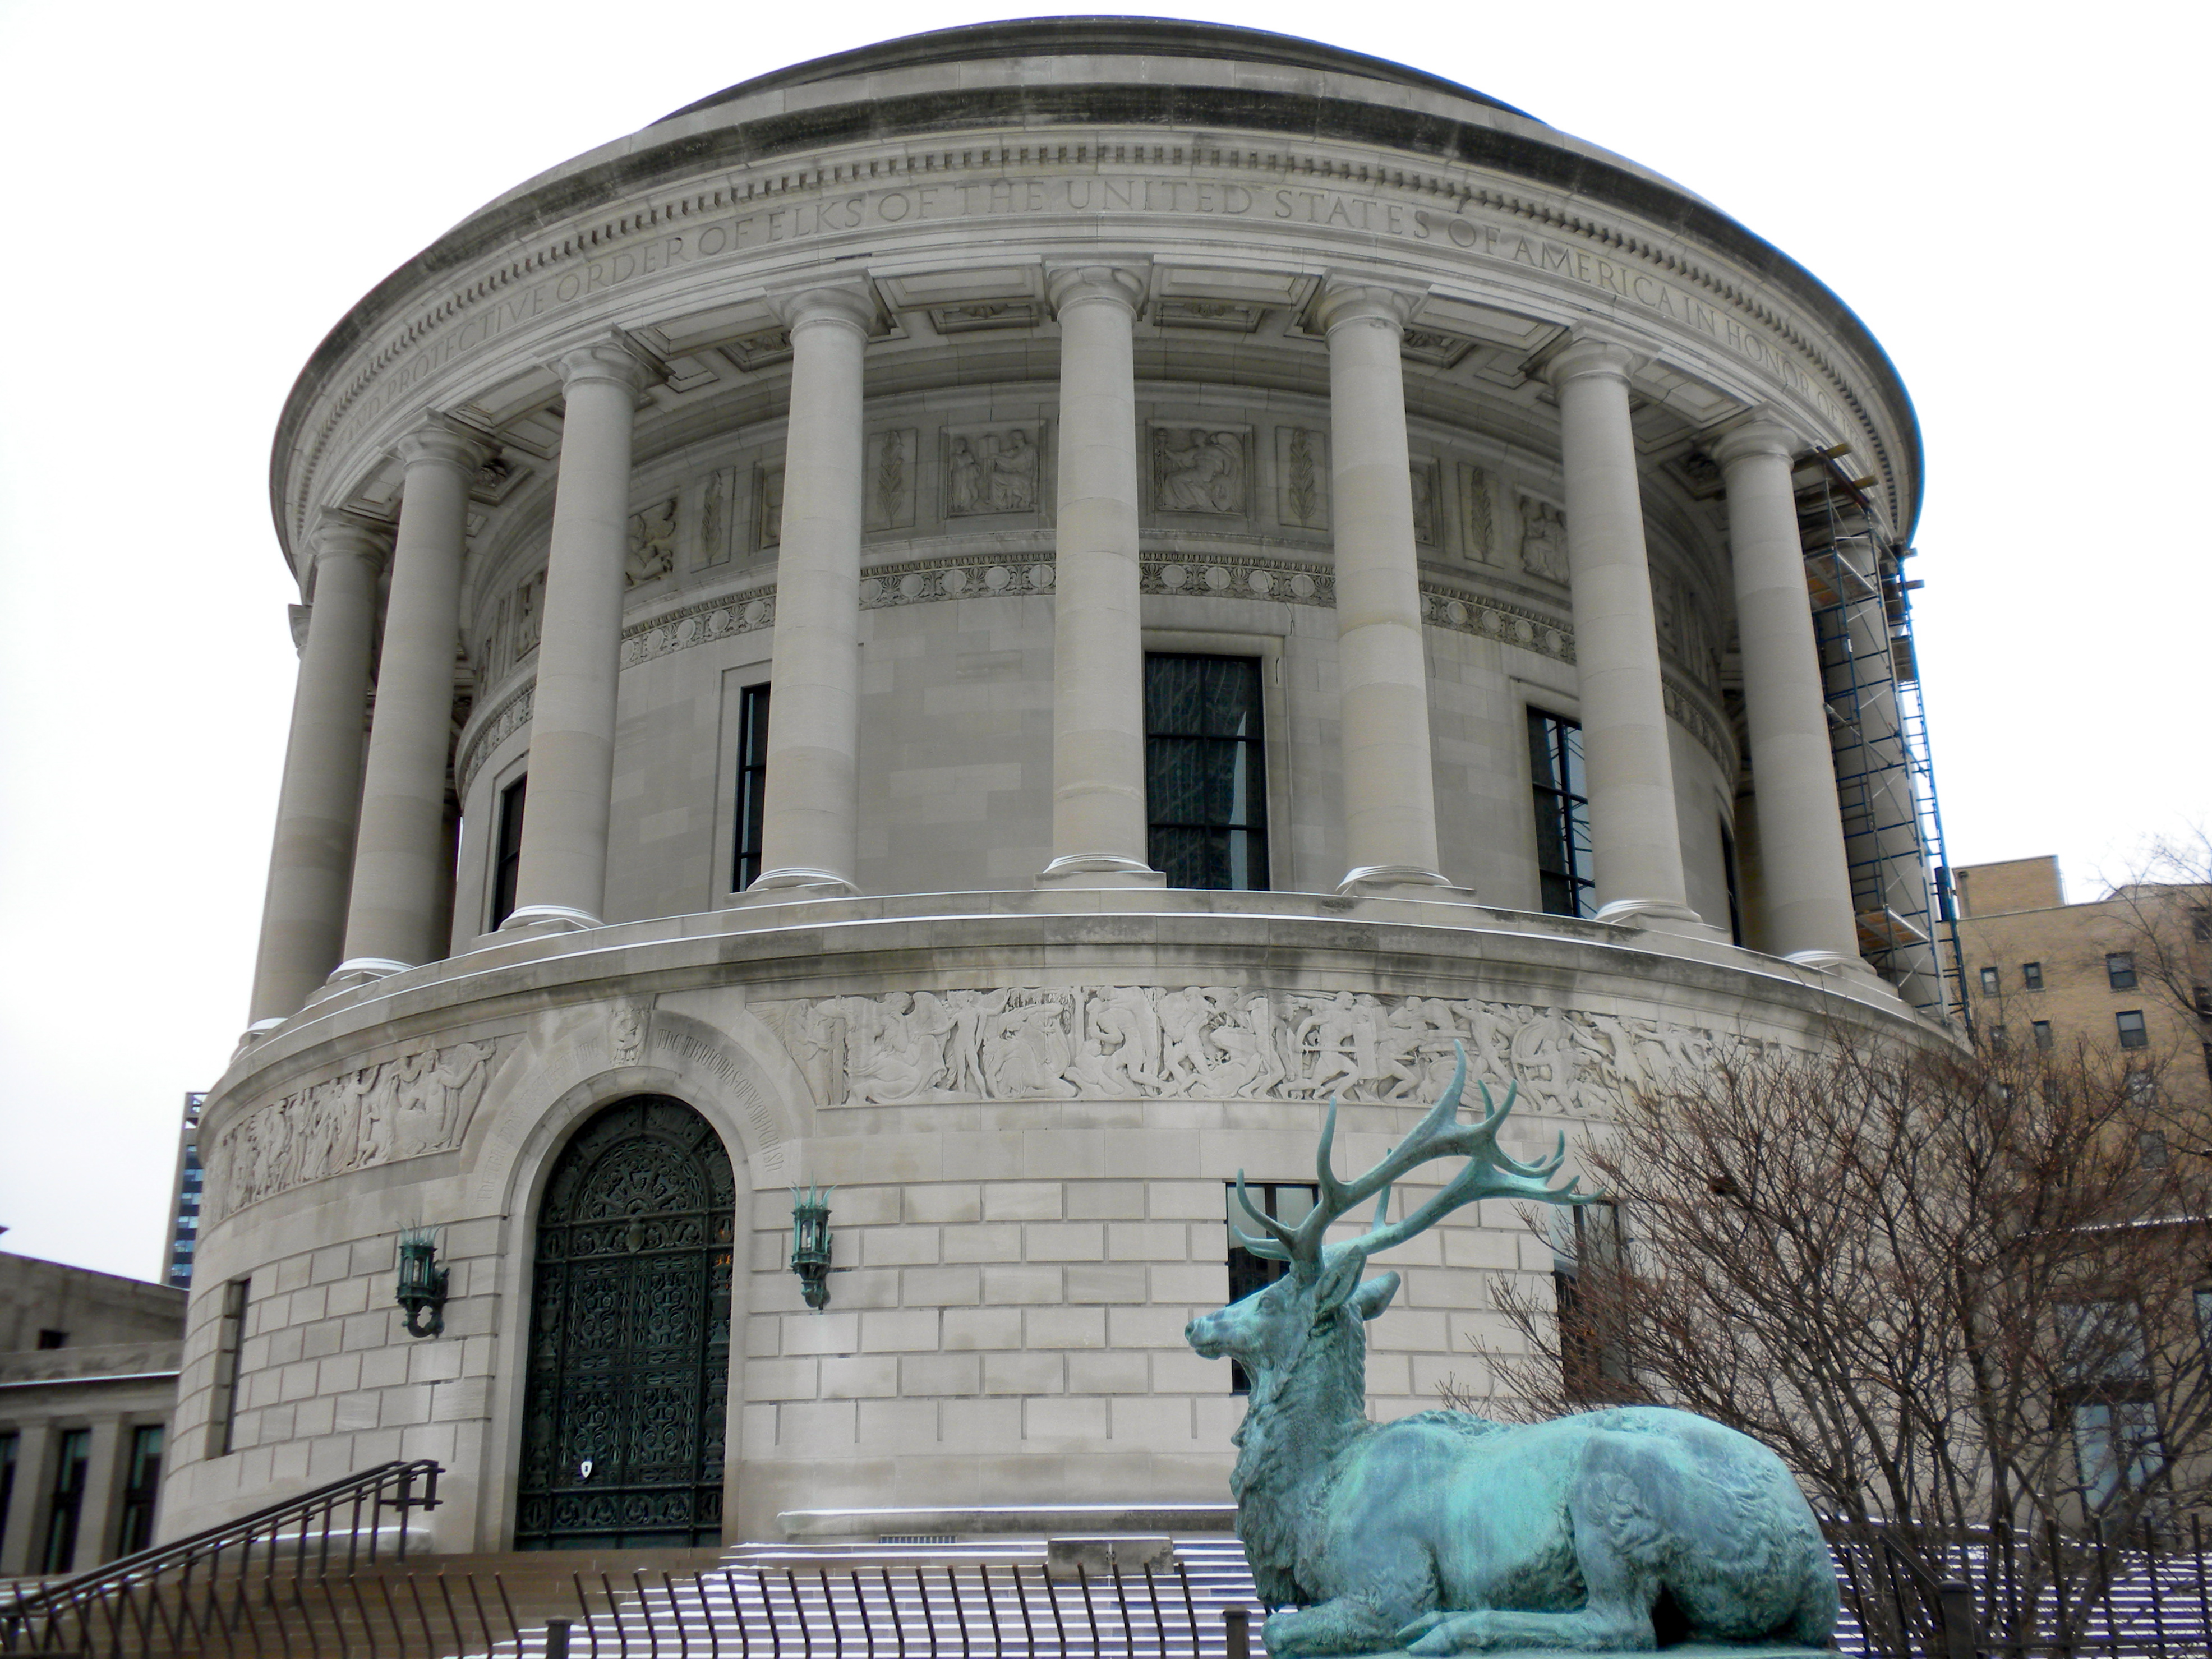 Elks Grand Lodge in Chicago, IL. The Elks total Membership was 1.6 Million in 1976 and 750,000 in June 2020. By Smallbones - Own work, Public Domain, https://commons.wikimedia.org/w/index.php?curid=9429178